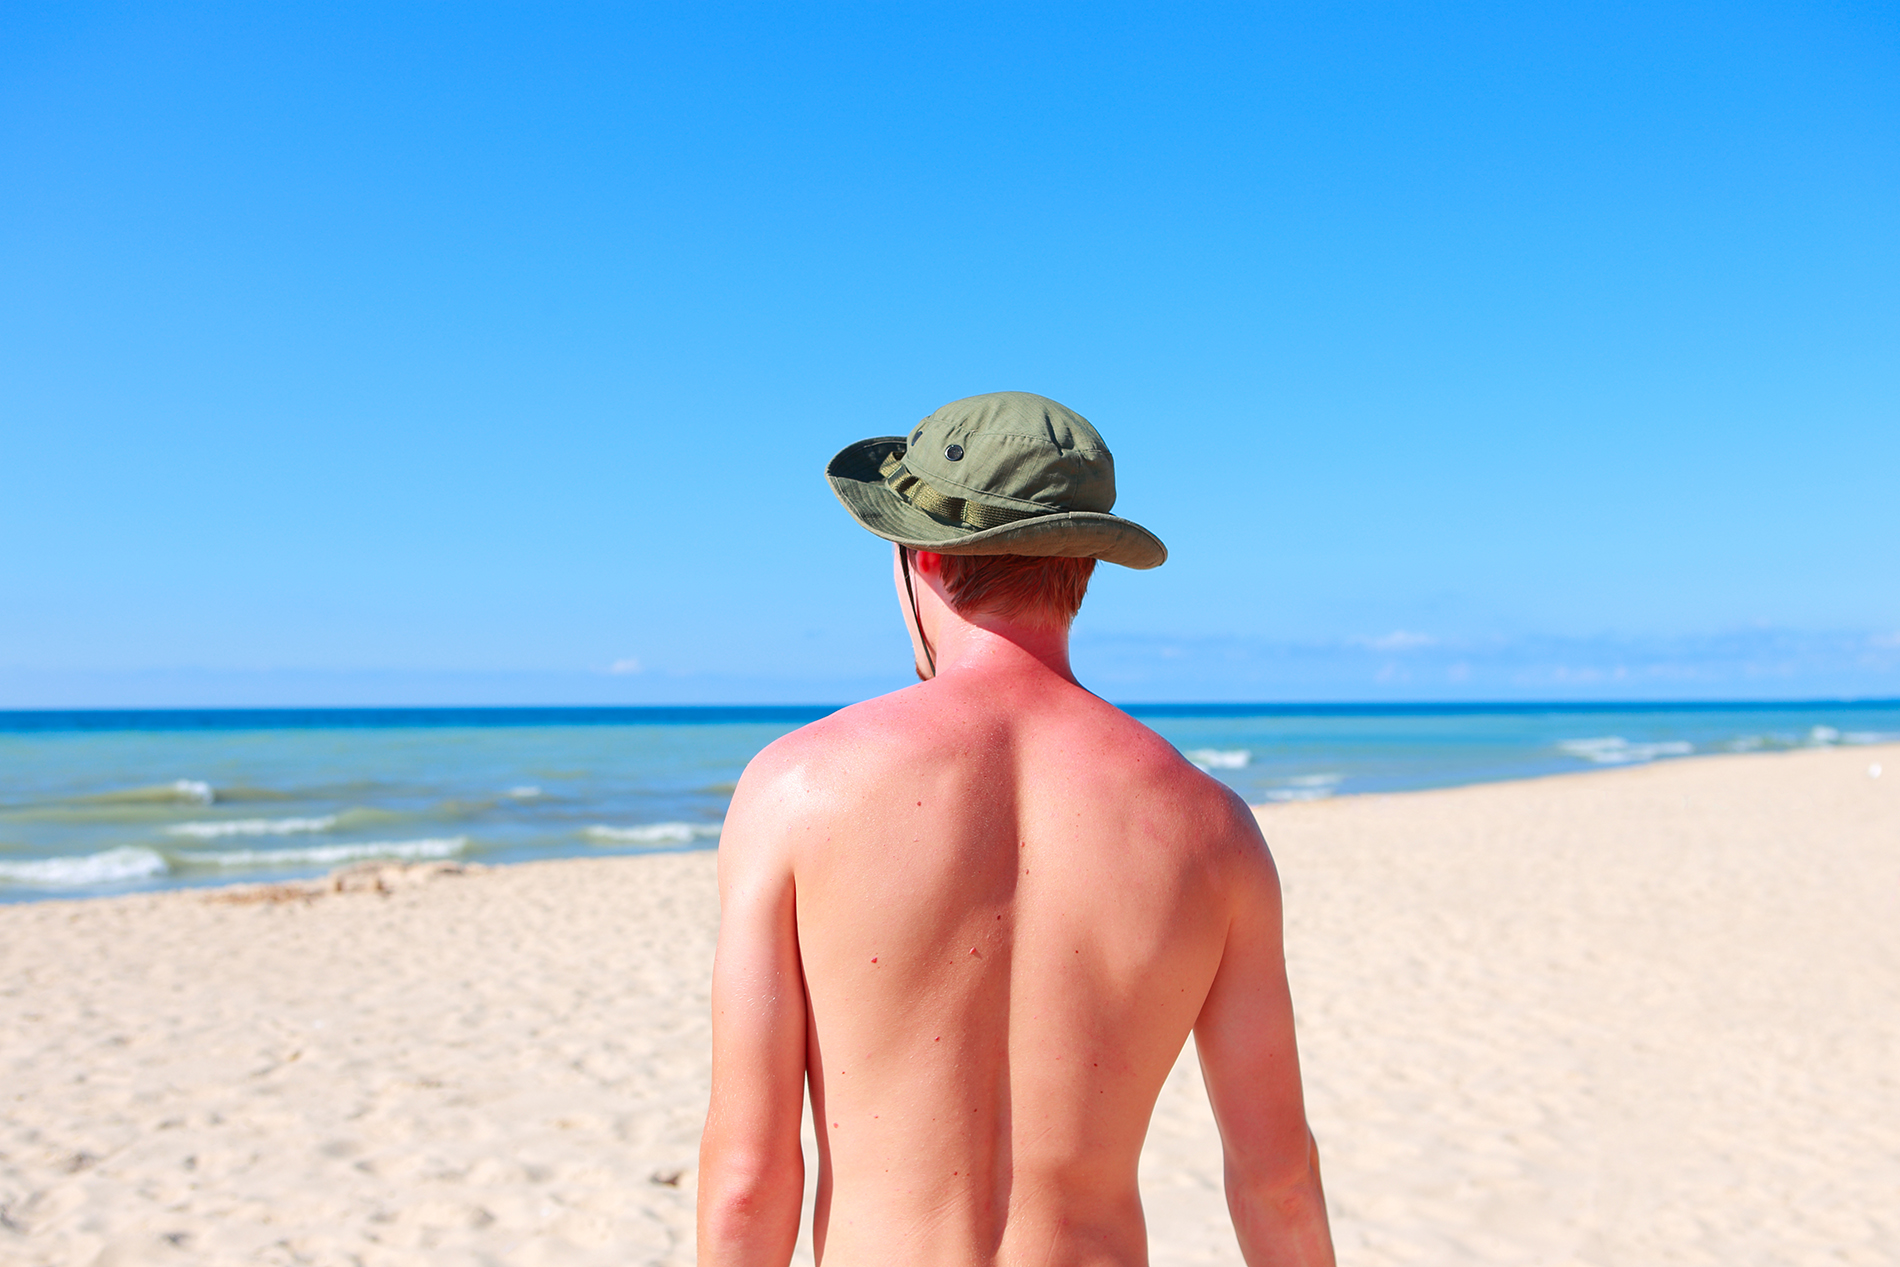 Man in hat on beach facing away from camera